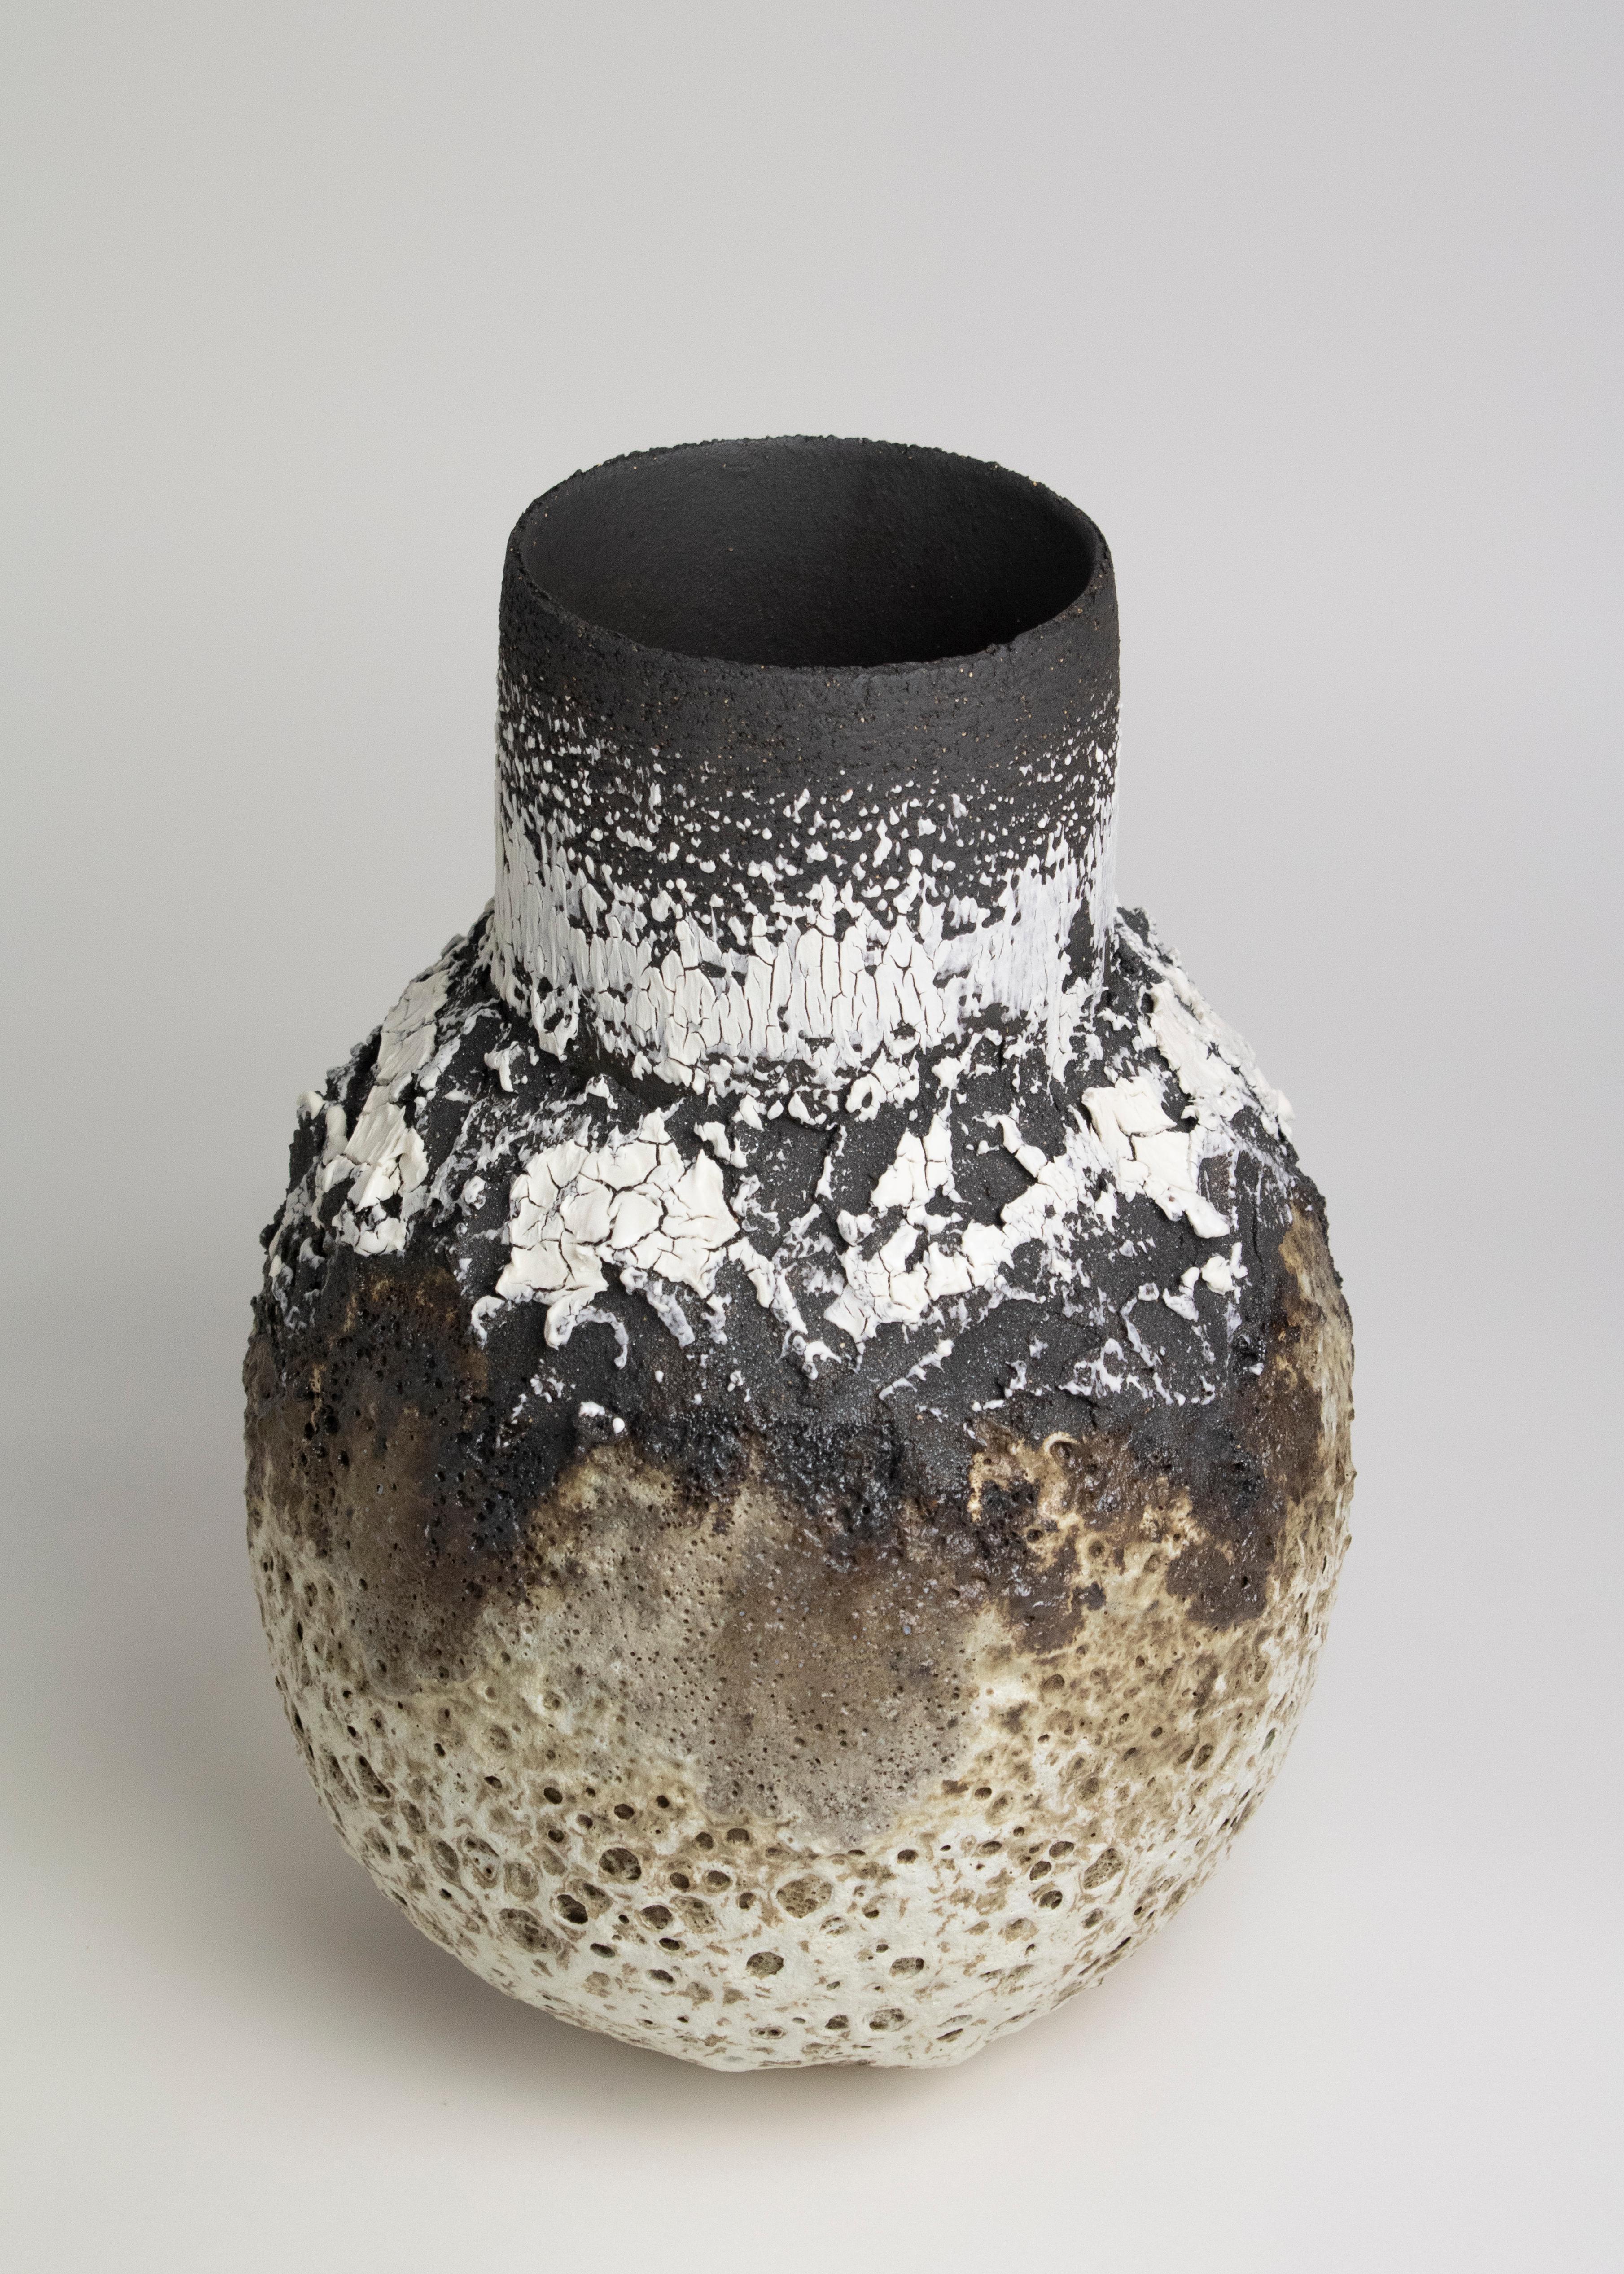 Hand-Crafted Black, White & Mocha Large Heavily Textured Stoneware, Porcelain Volcanic Vessel For Sale